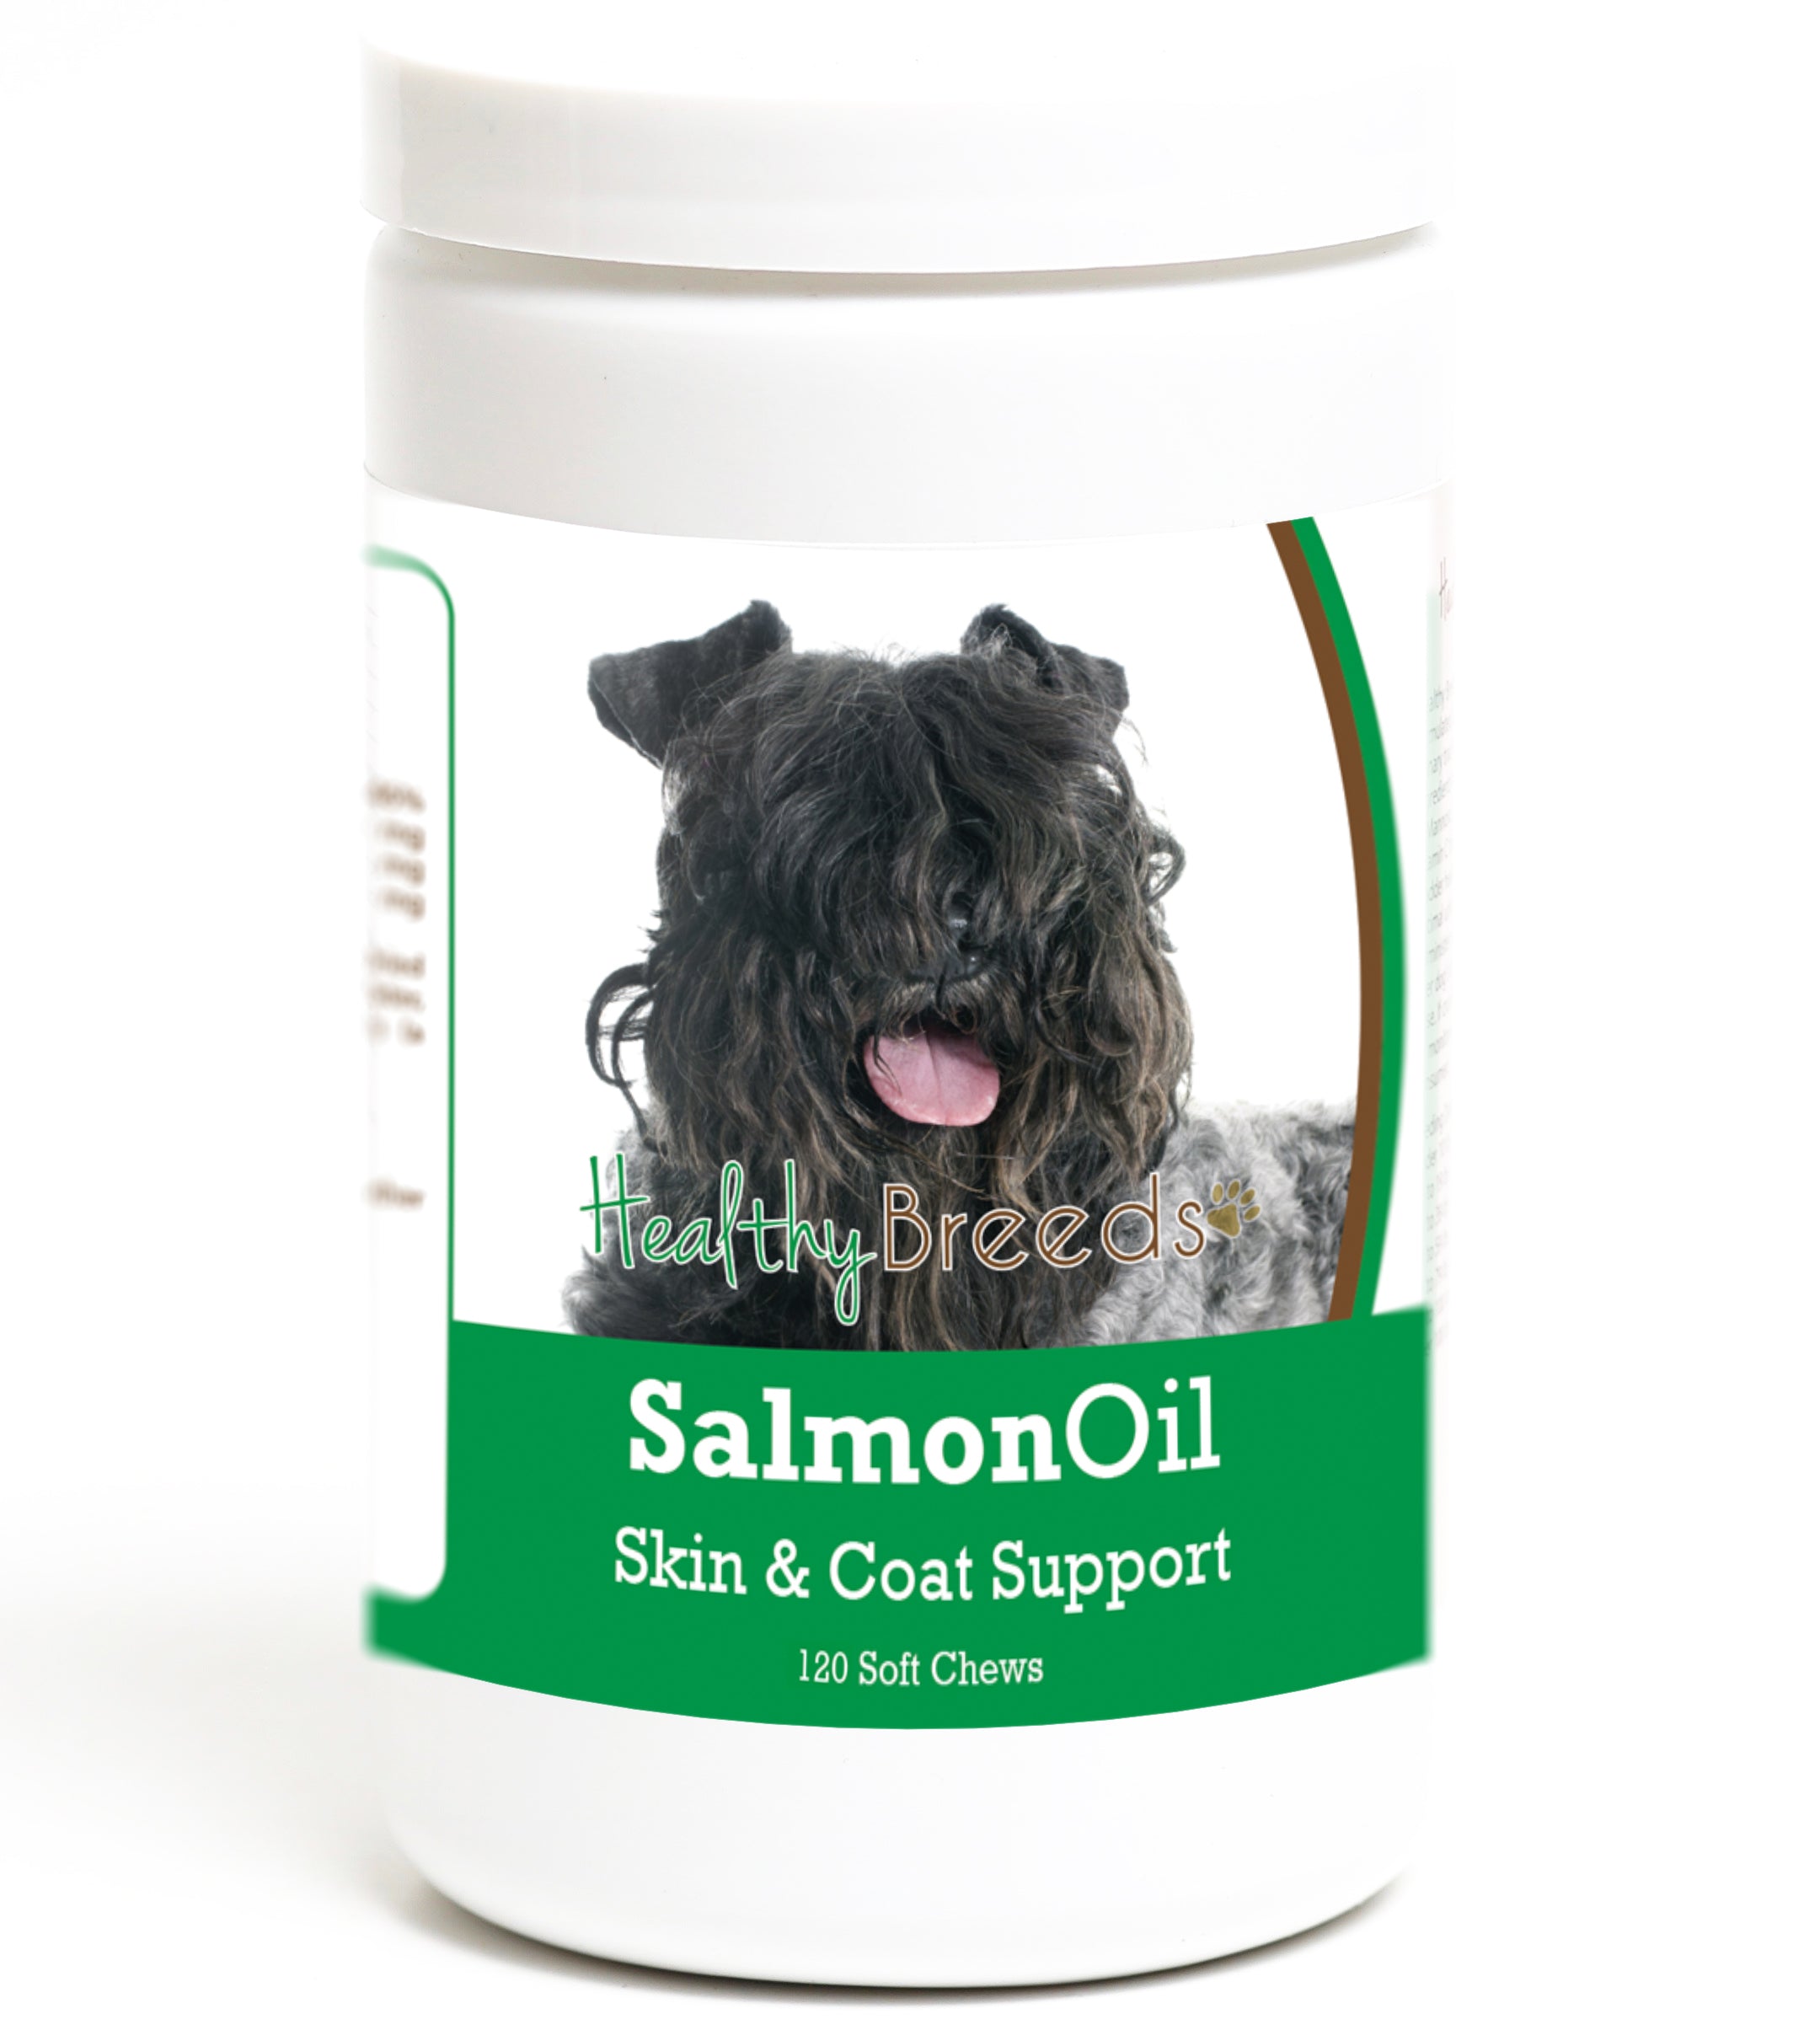 Kerry Blue Terrier Salmon Oil Soft Chews 120 Count